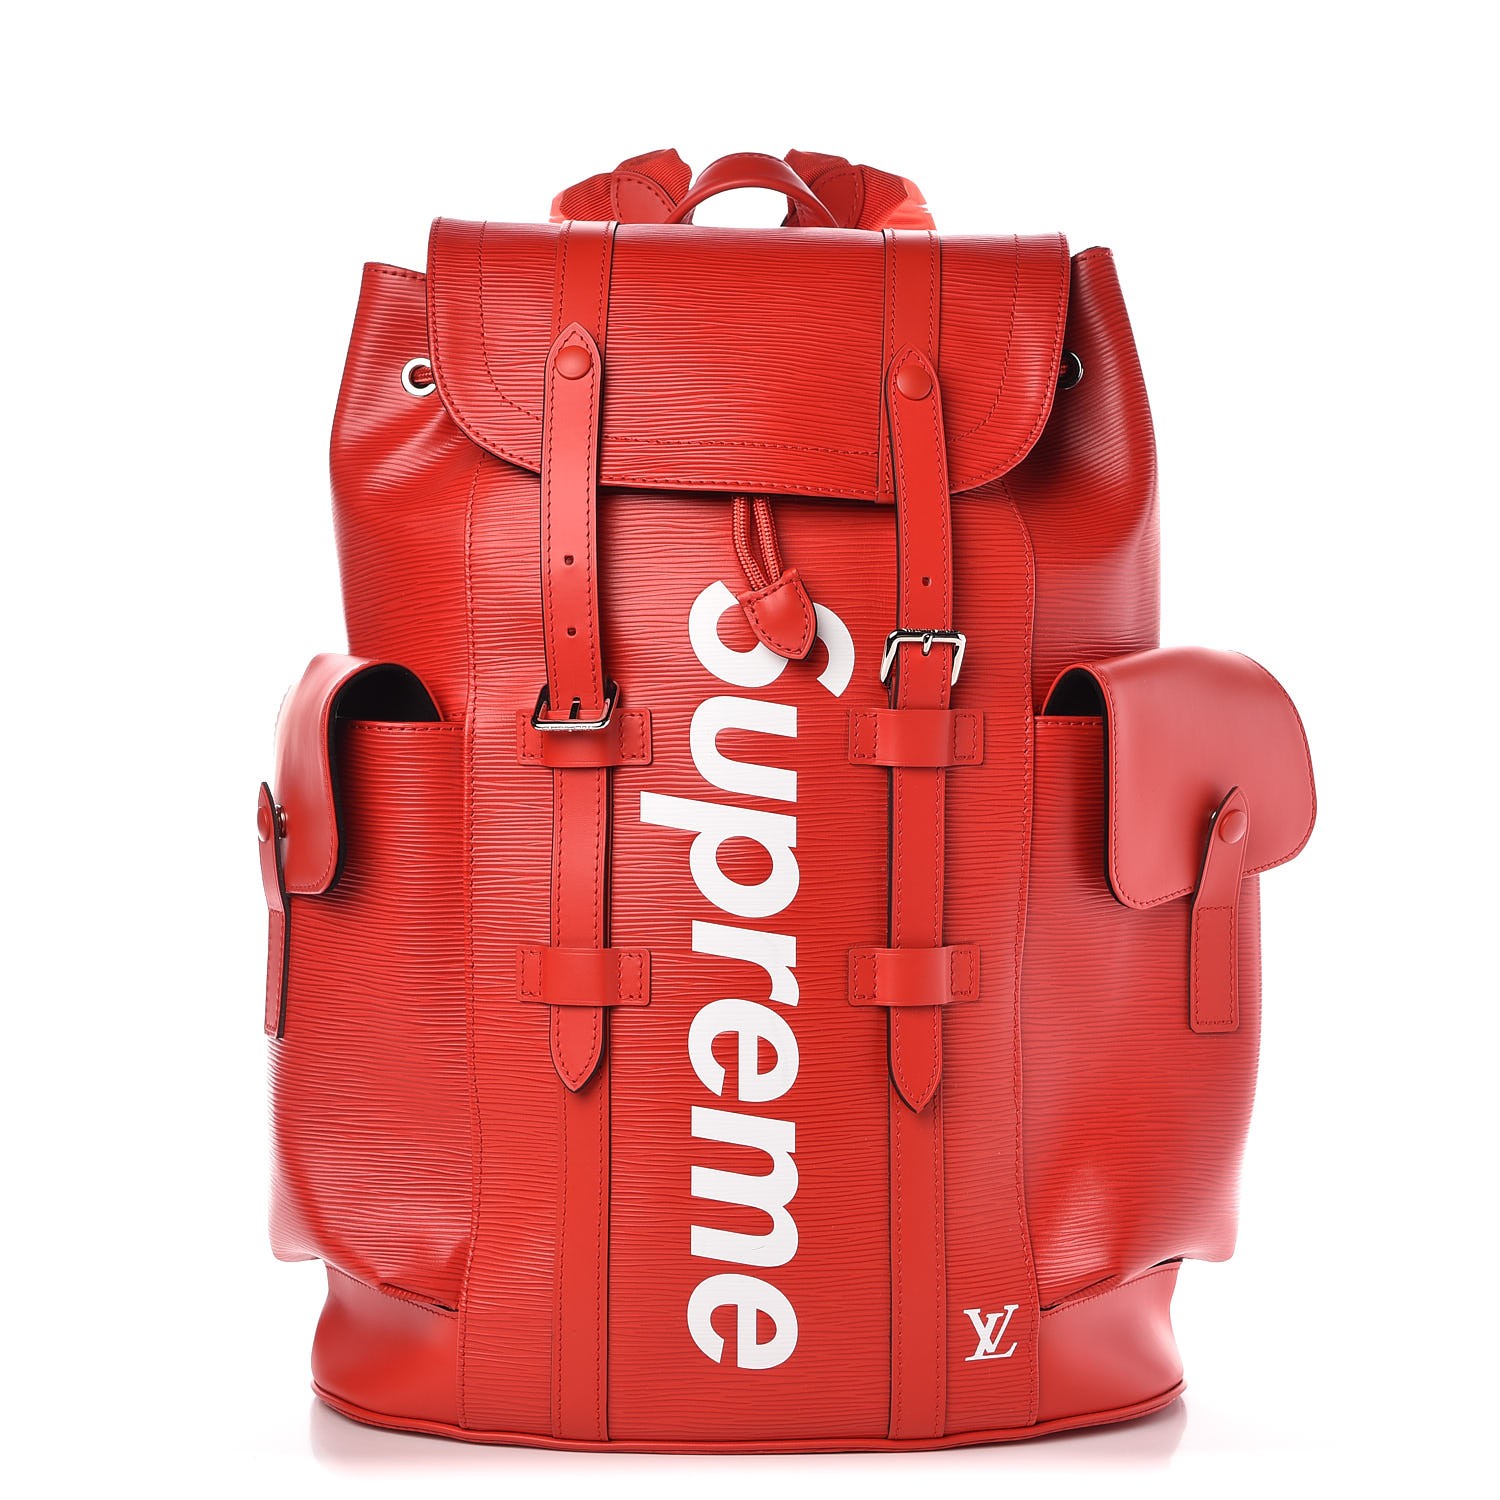 All Red Supreme Backpack Shop, 53% OFF | www.ingeniovirtual.com